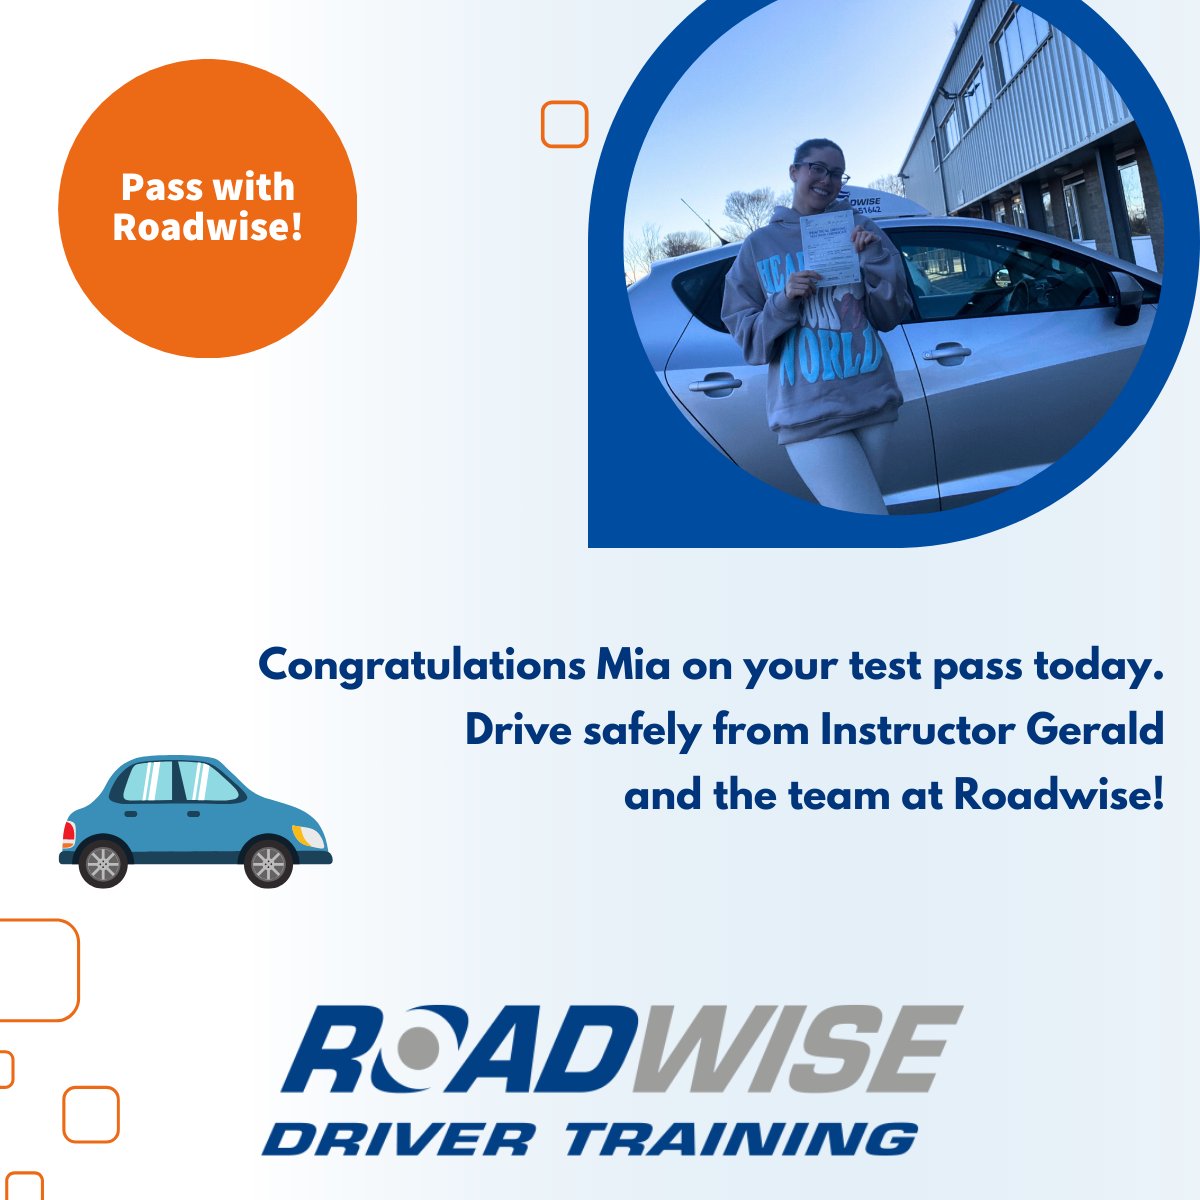 👉Get in Touch!
☎️08000 151 642
✉️info@roadwisedrivertraining.co.uk
#passwithRoadwise #learntodrive #drive2024